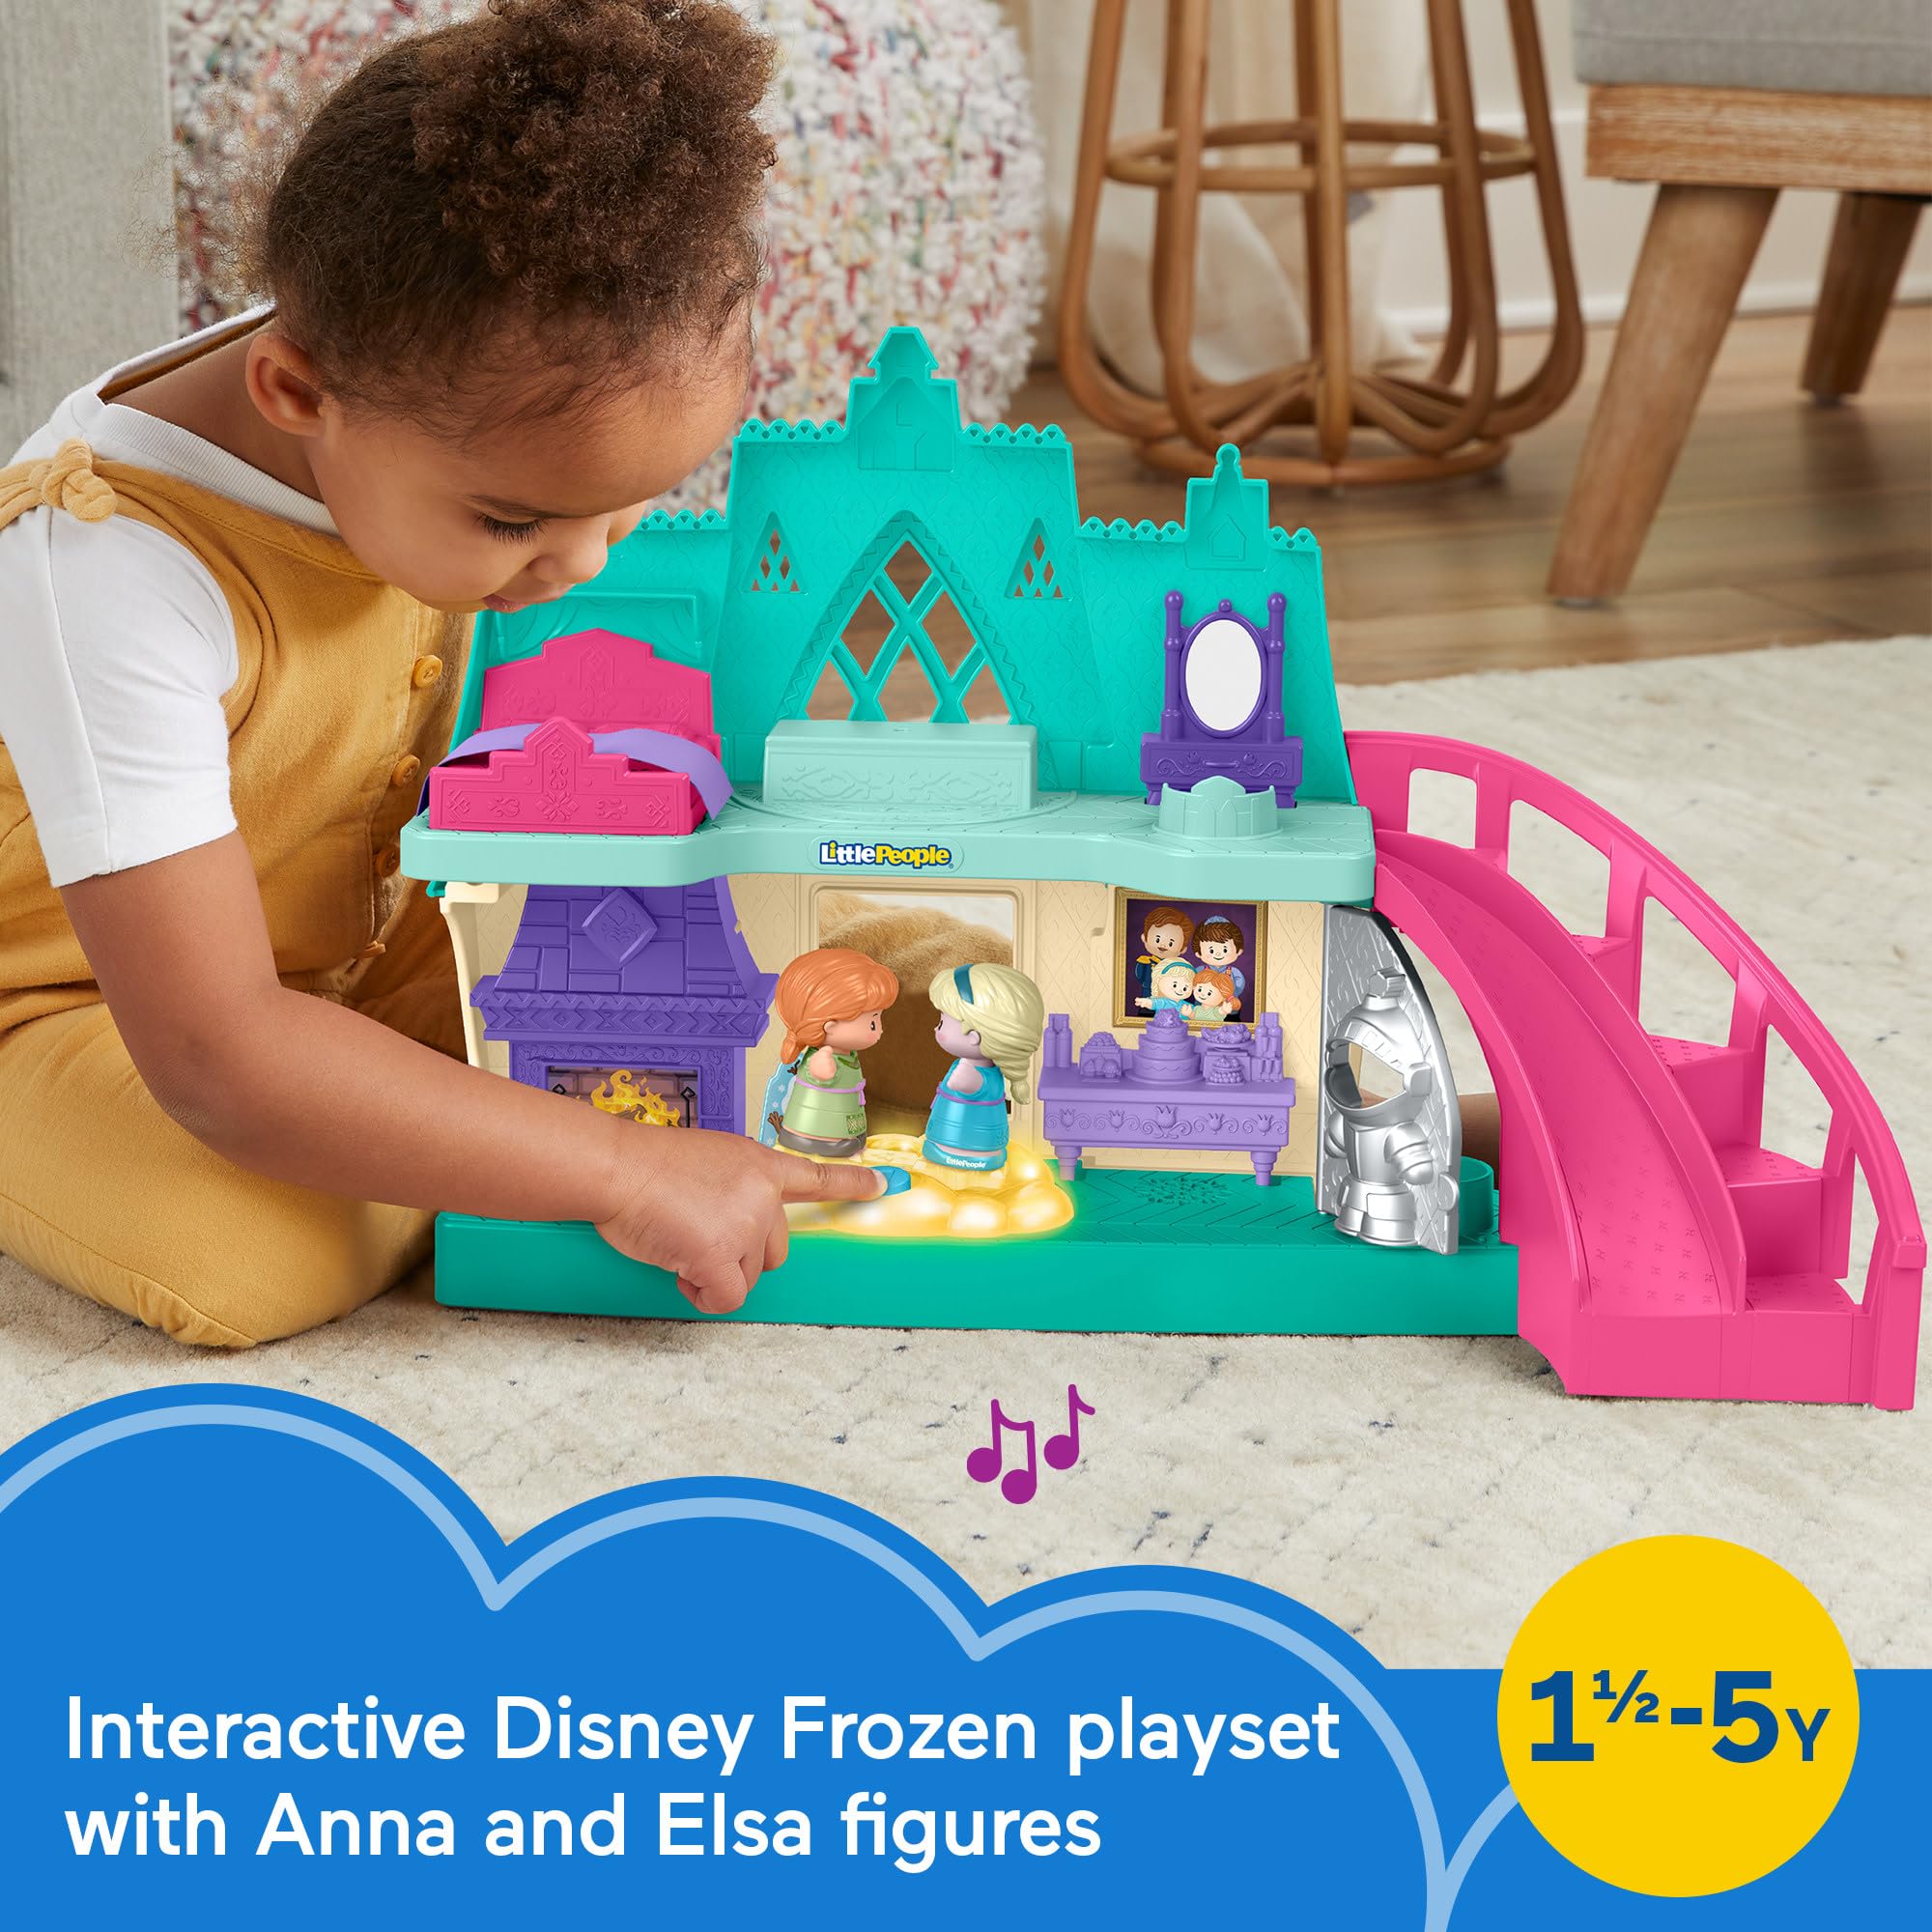 Fisher-Price Little People Toddler Playset Disney Frozen Arendelle Castle with Lights Sounds Anna & Elsa Figures for Ages 18+ Months (Amazon Exclusive)